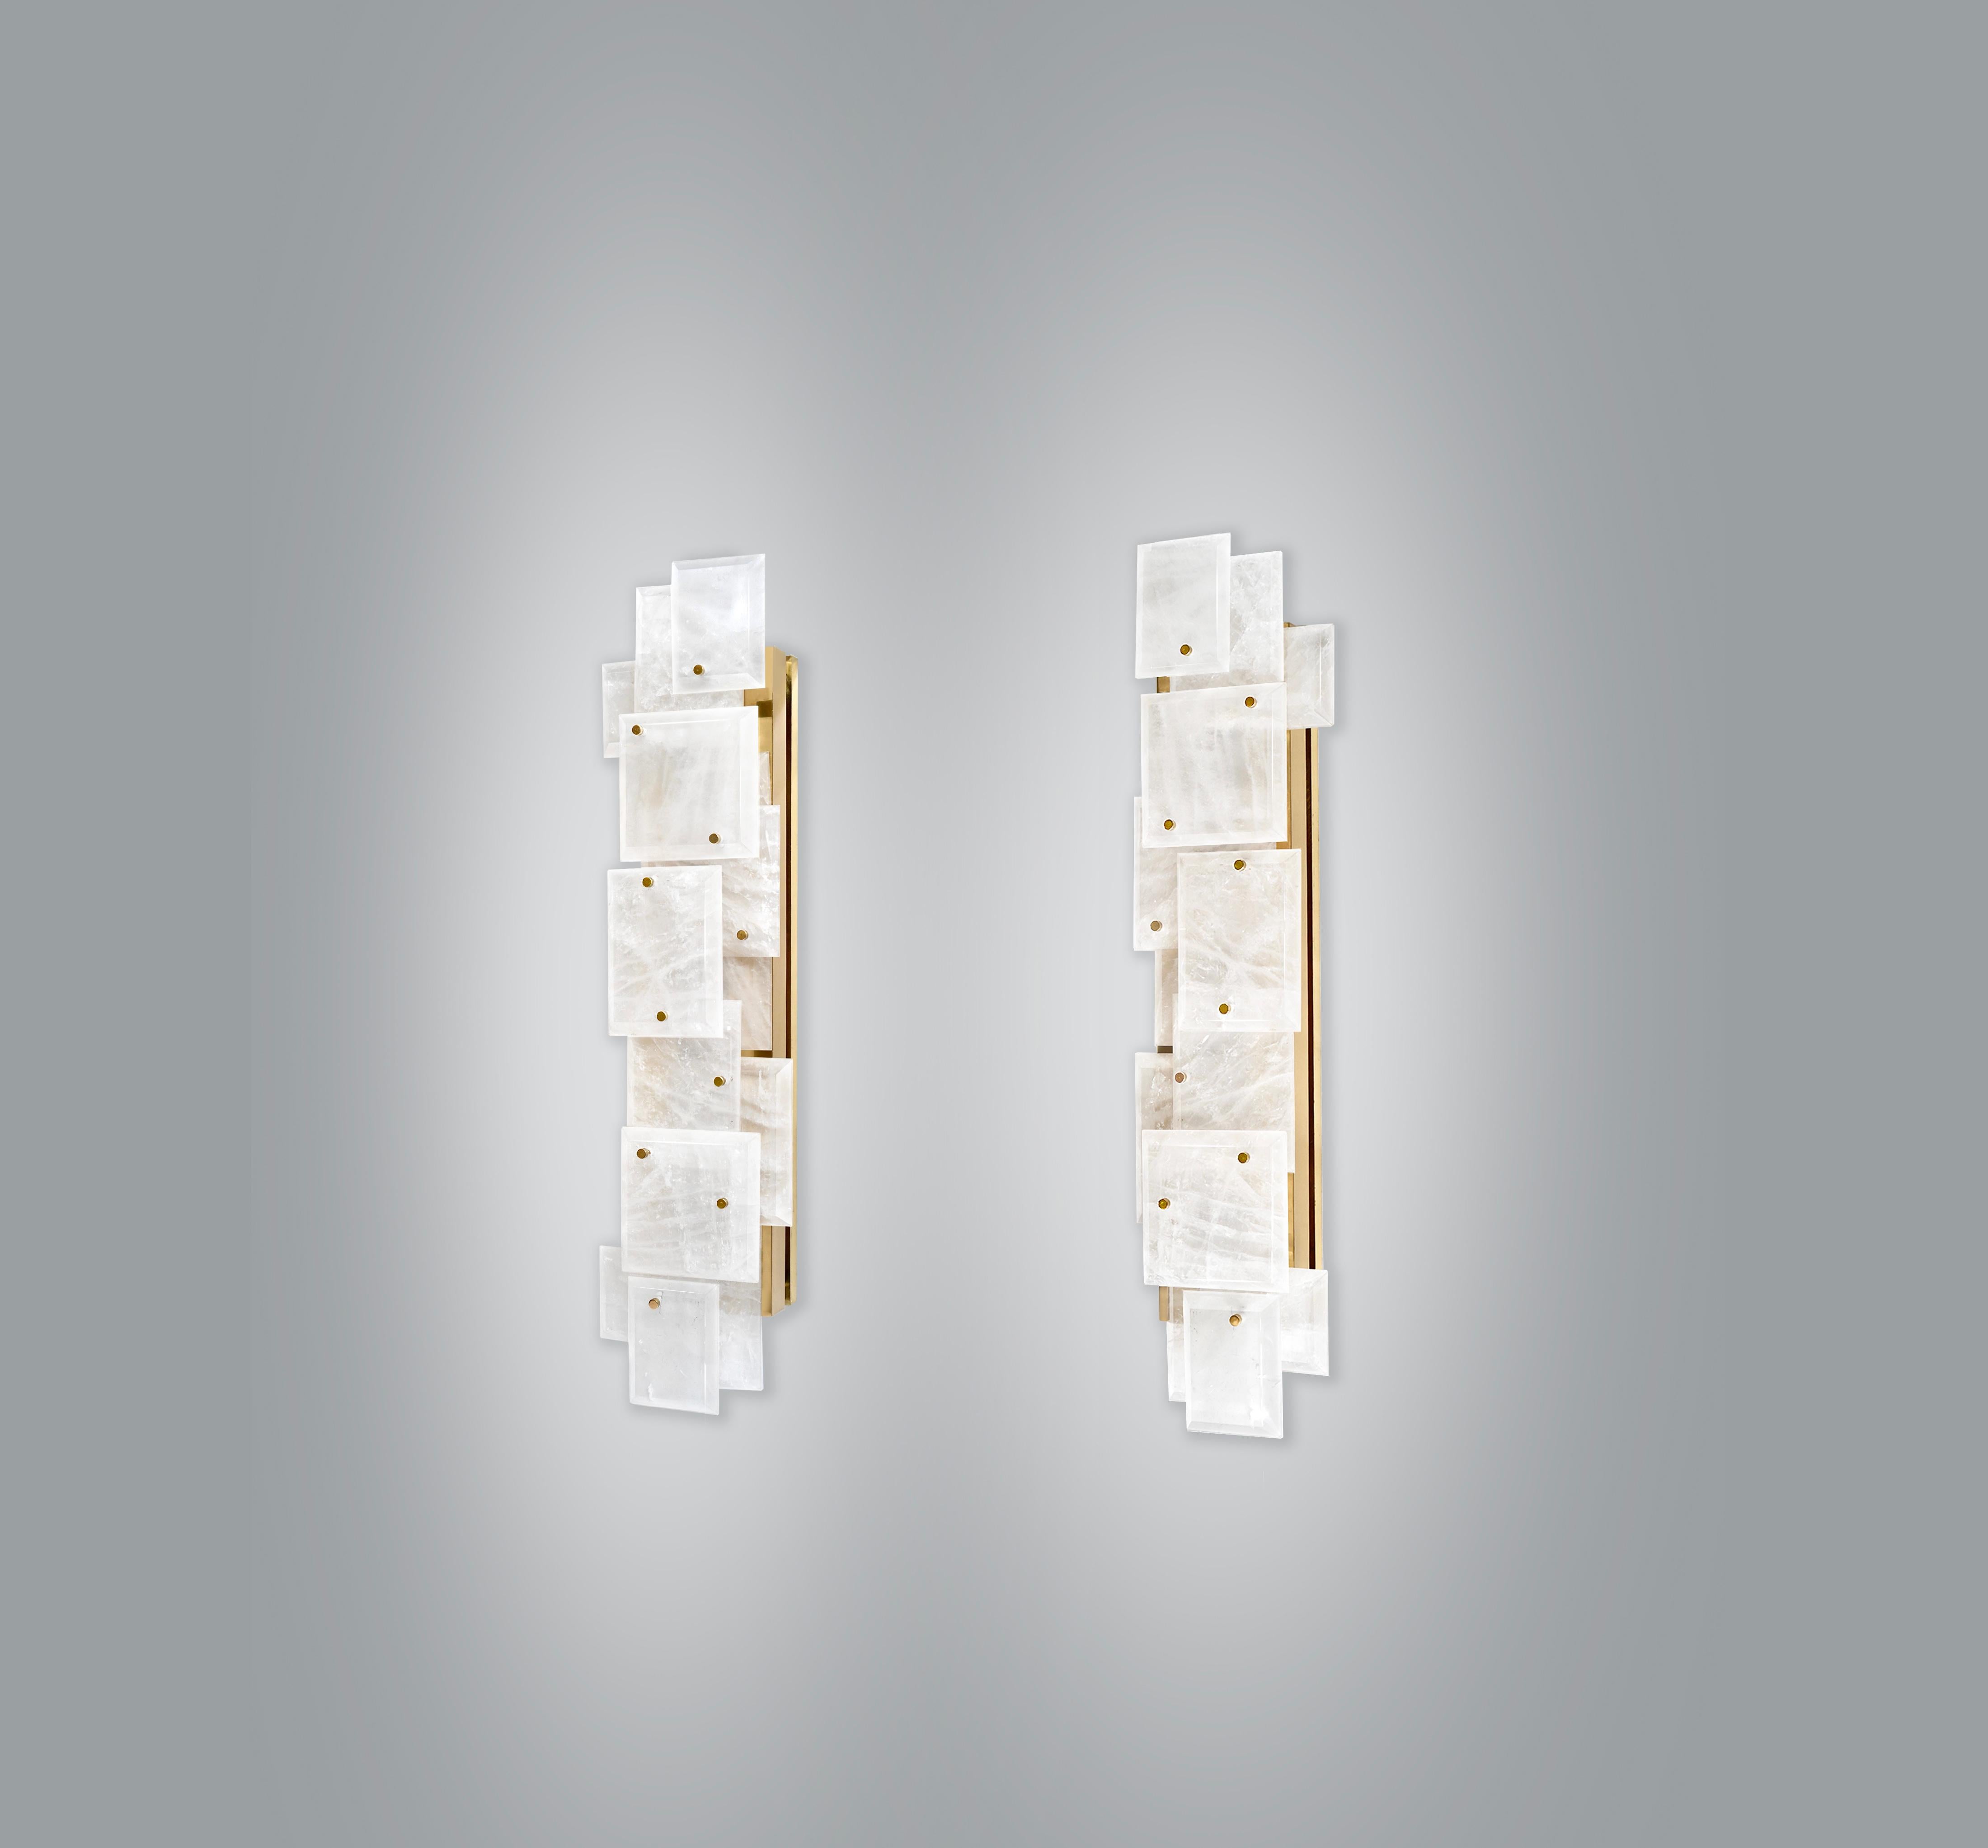 Pair of modern rock crystal quartz sconces with multiple panels decorations in polished brass finish. Created by Phoenix Gallery.
Each sconce installed four sockets, use four 75 watts Led warm light bulbs, 300watts total. Light bulbs supplied.
   